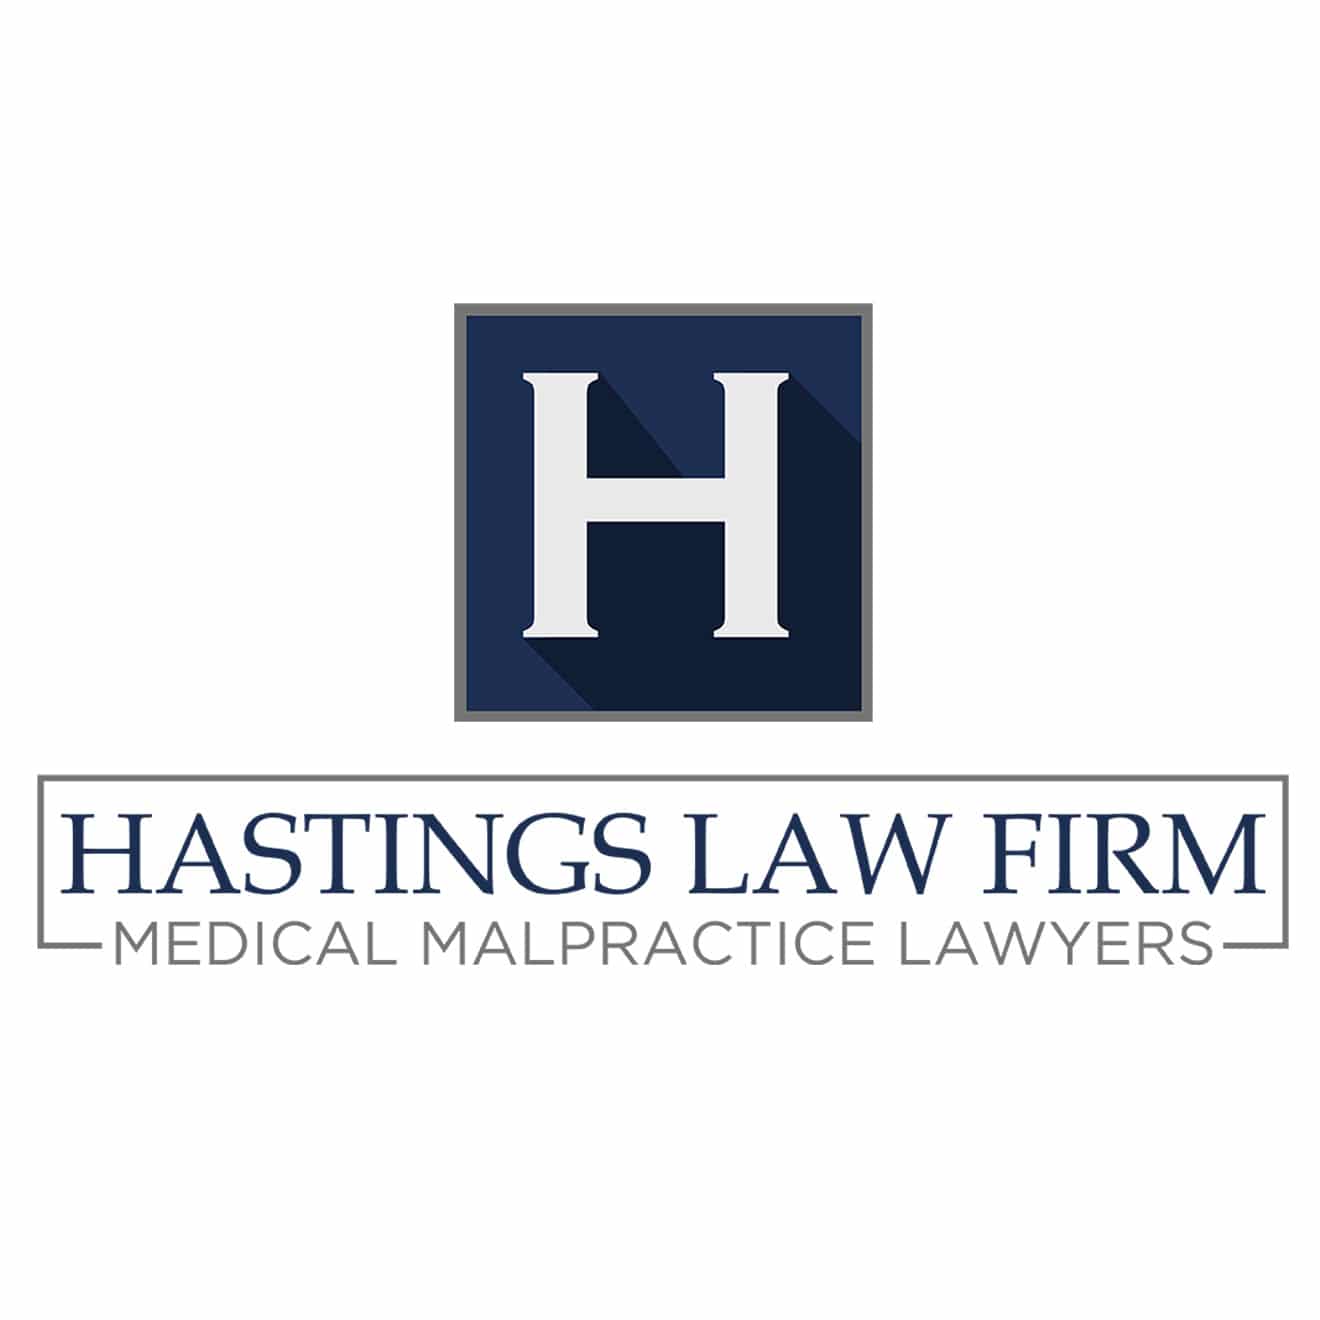 best-houston-medical-malpractice-lawyer -Hastings Law Firm